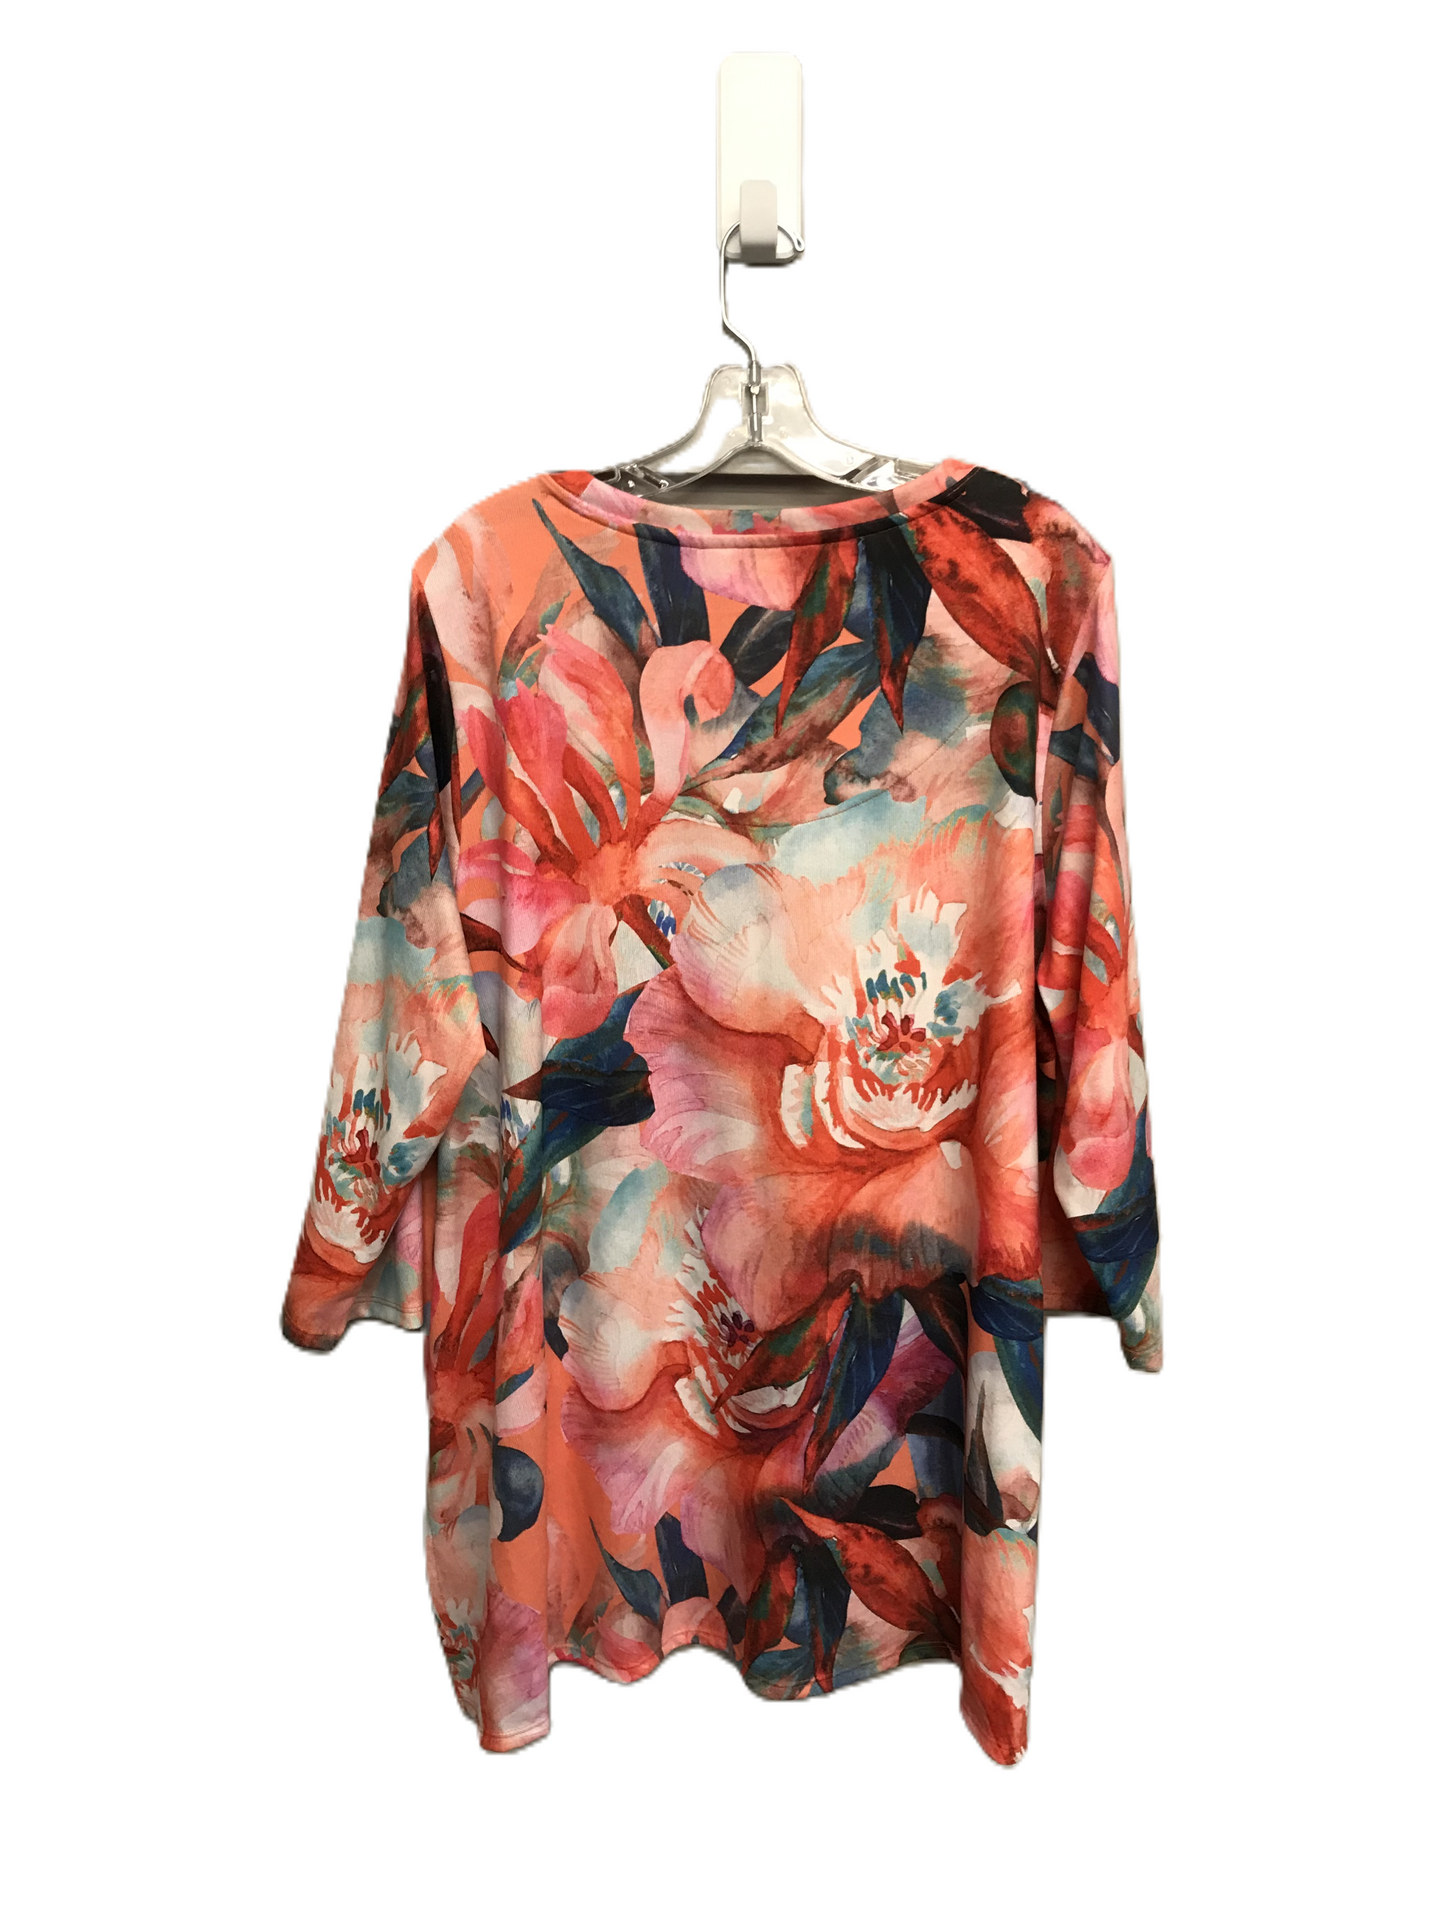 Floral Print Top Long Sleeve By Soft Surroundings, Size: 1x